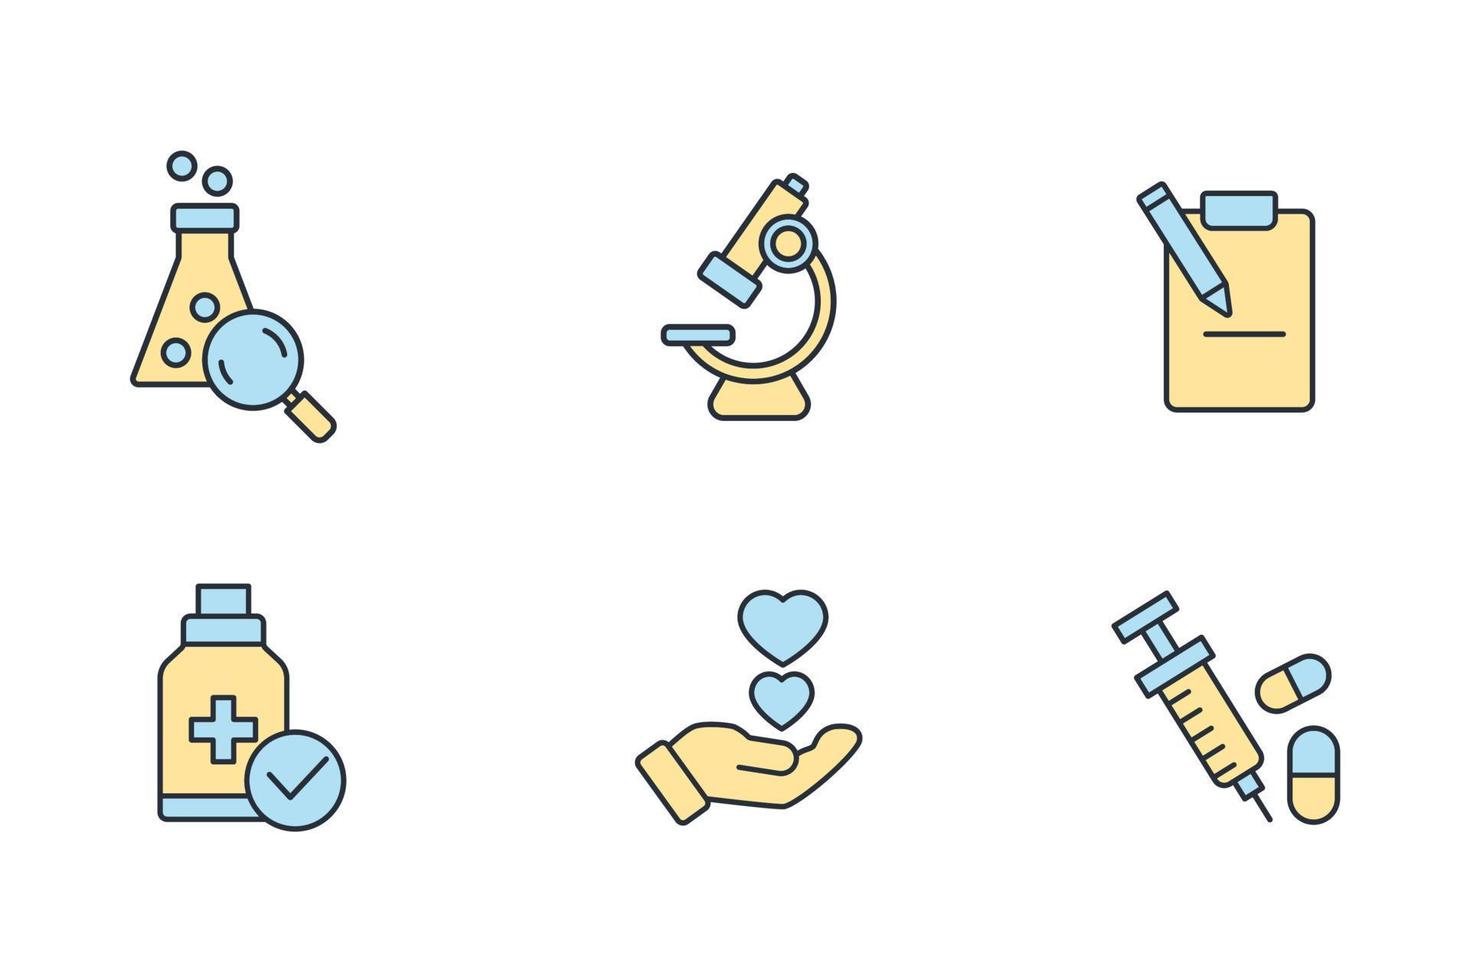 clinical research icons set . clinical research pack symbol vector elements for infographic web